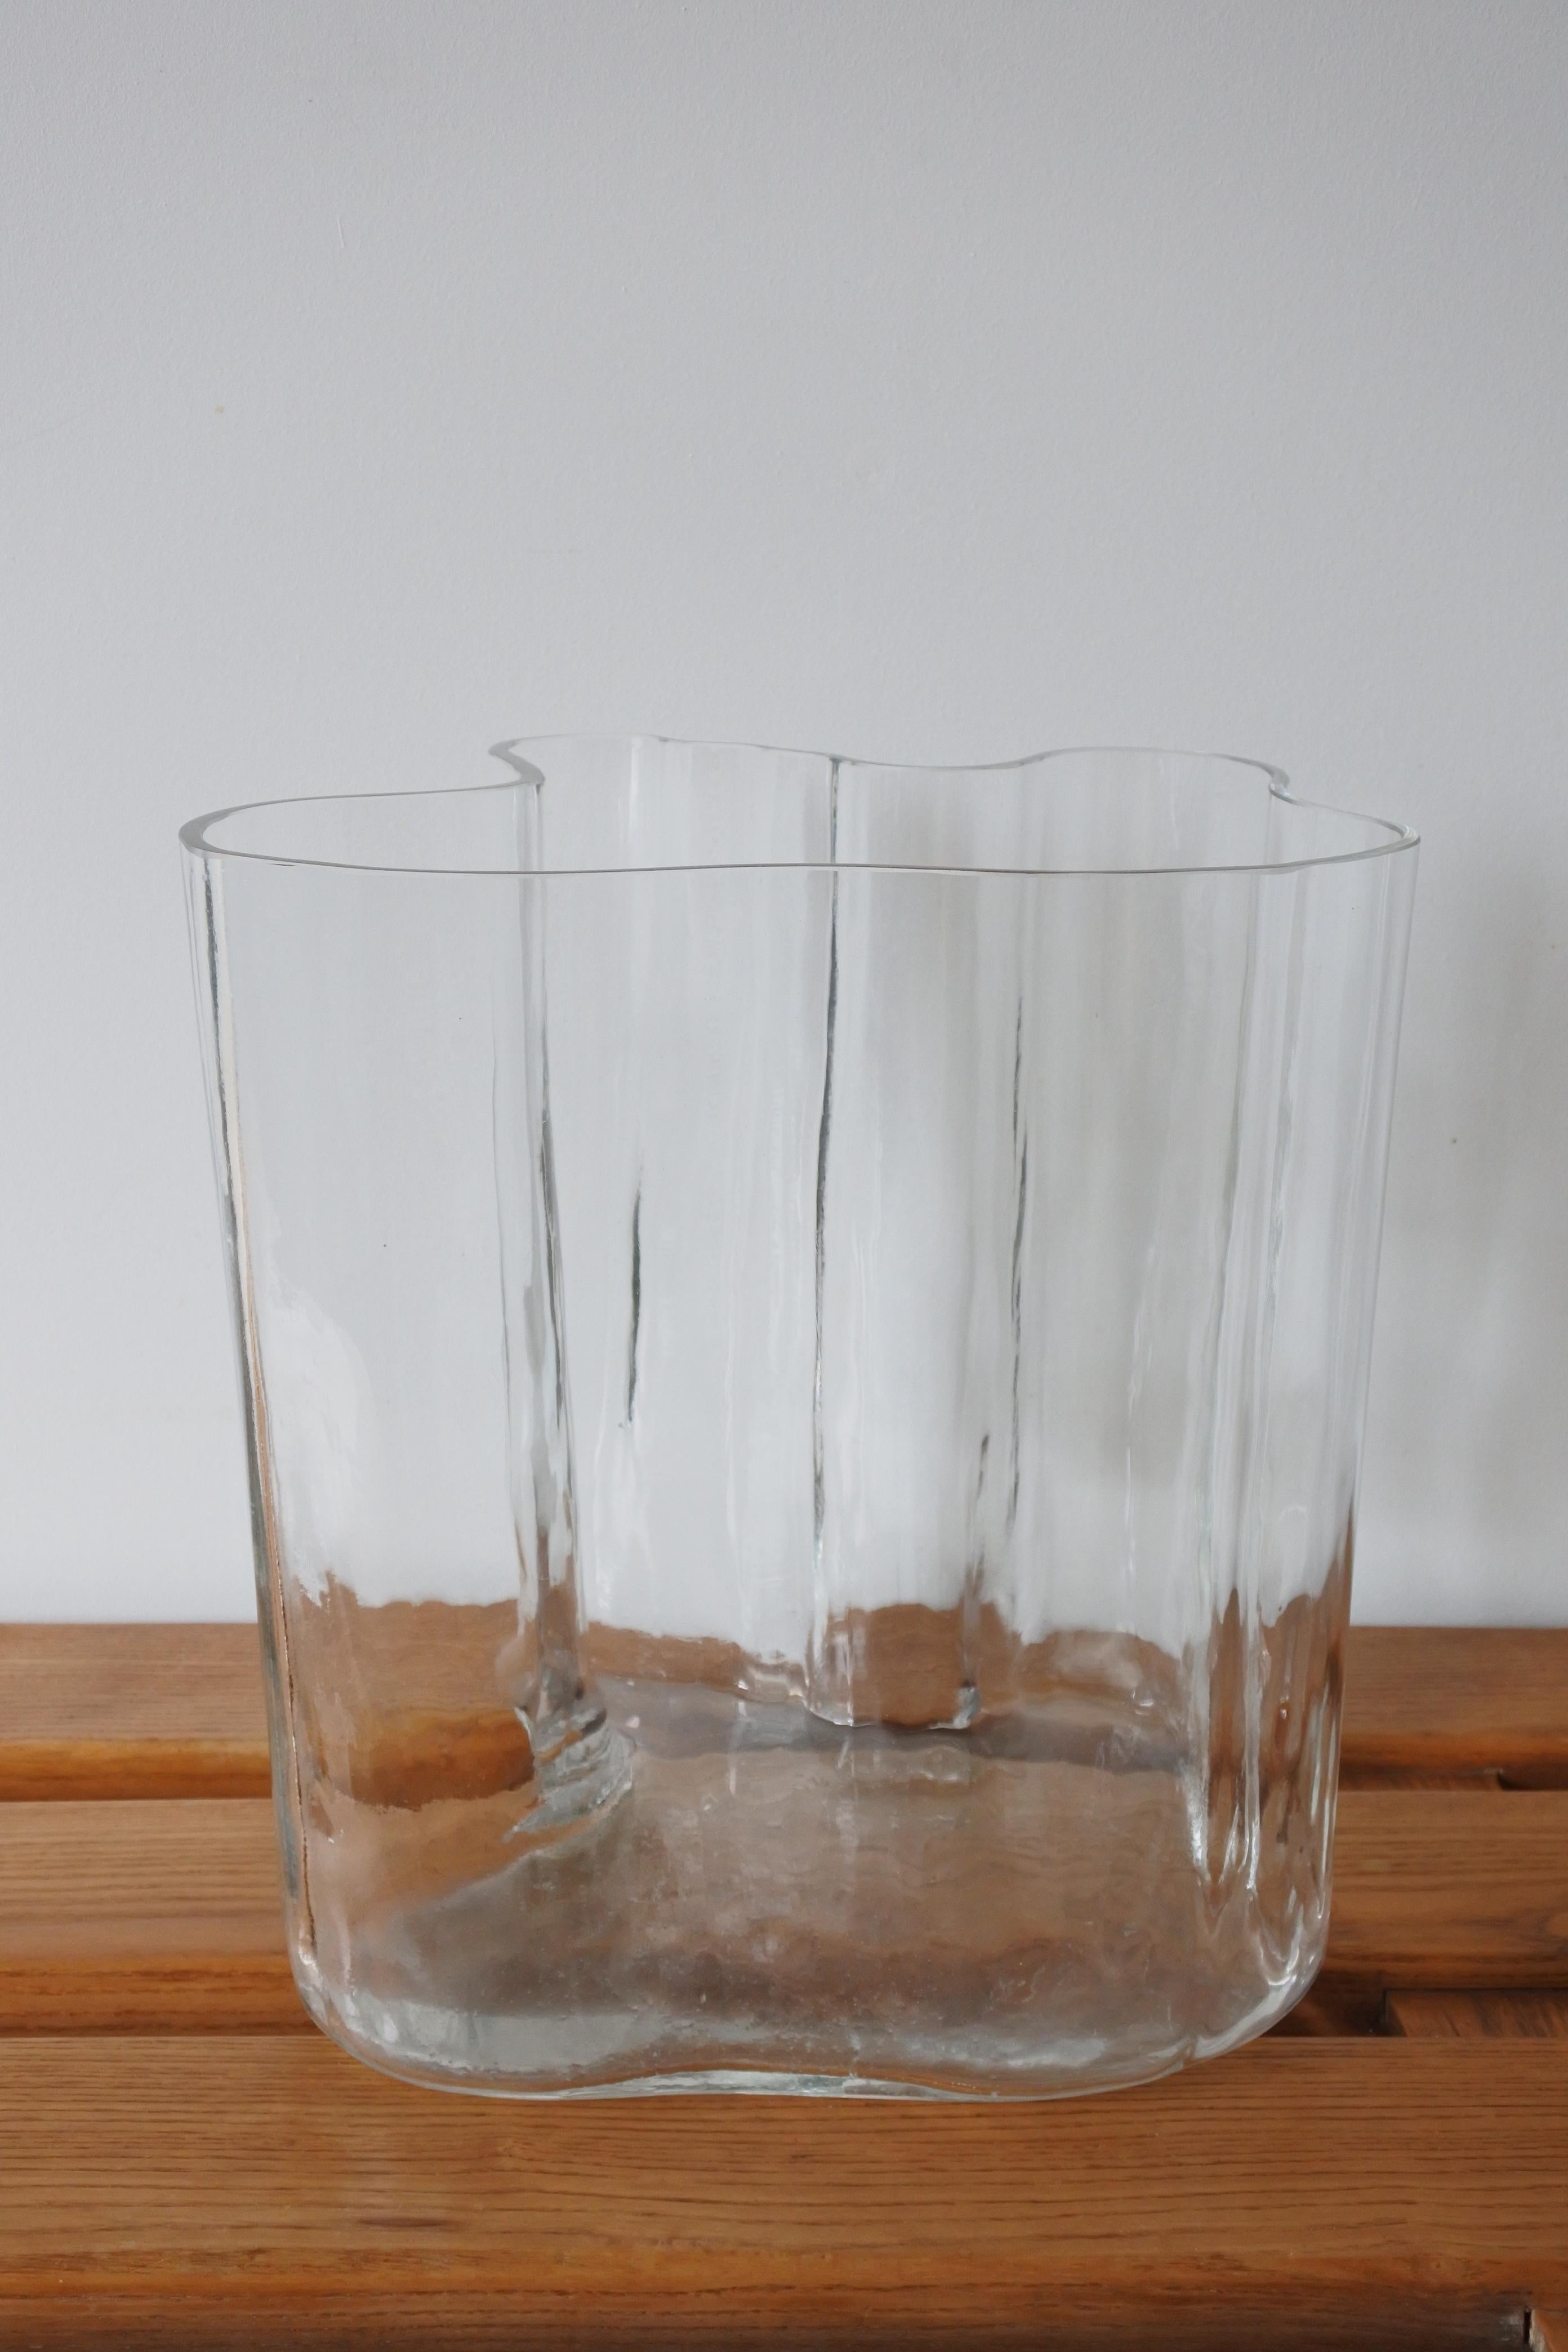 Clear glass vase by Alvar Aalto, model 3031 also known as Savoy vase
Made by Iittala in 1956
Still-blown into a wooden mould.
Engraved 